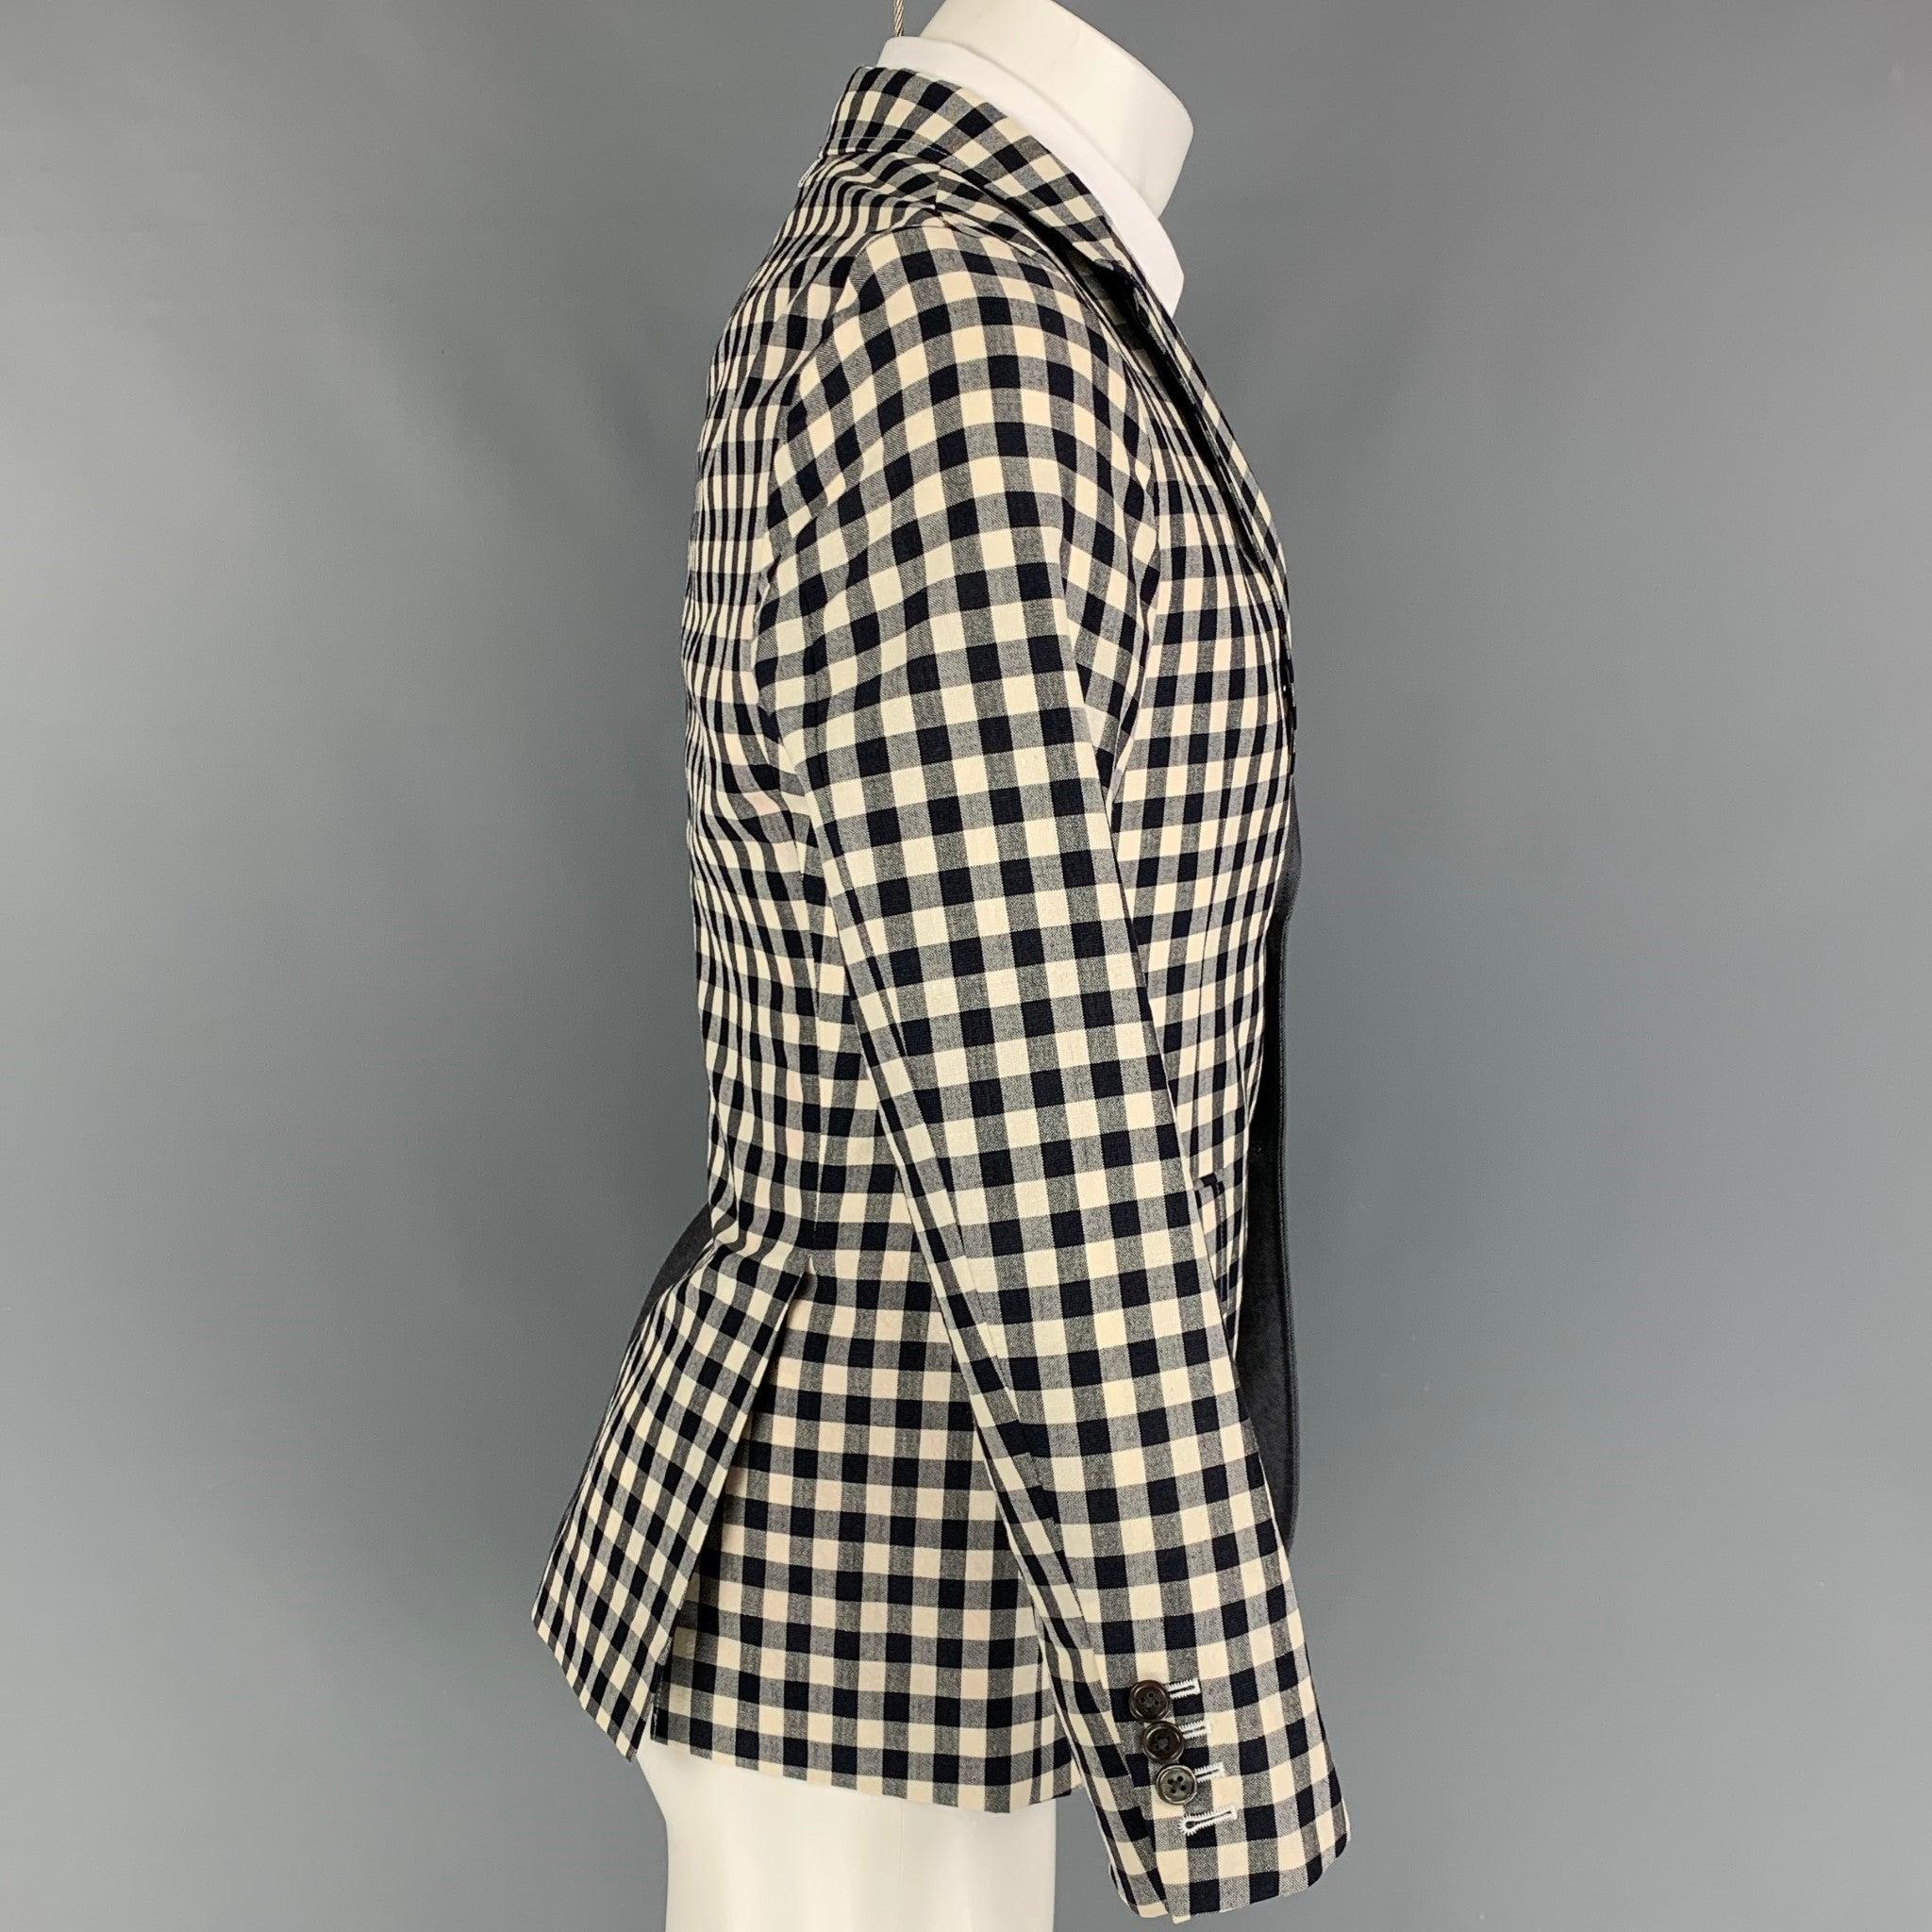 THOM BROWNE sport coat comes in a navy & red wool blend with a half liner featuring a half checkered design. notch lapel, flap pockets, double back vent, and a three button closure. Made in Japan.
Very Good Pre-Owned Condition. Faint mark at arm. 